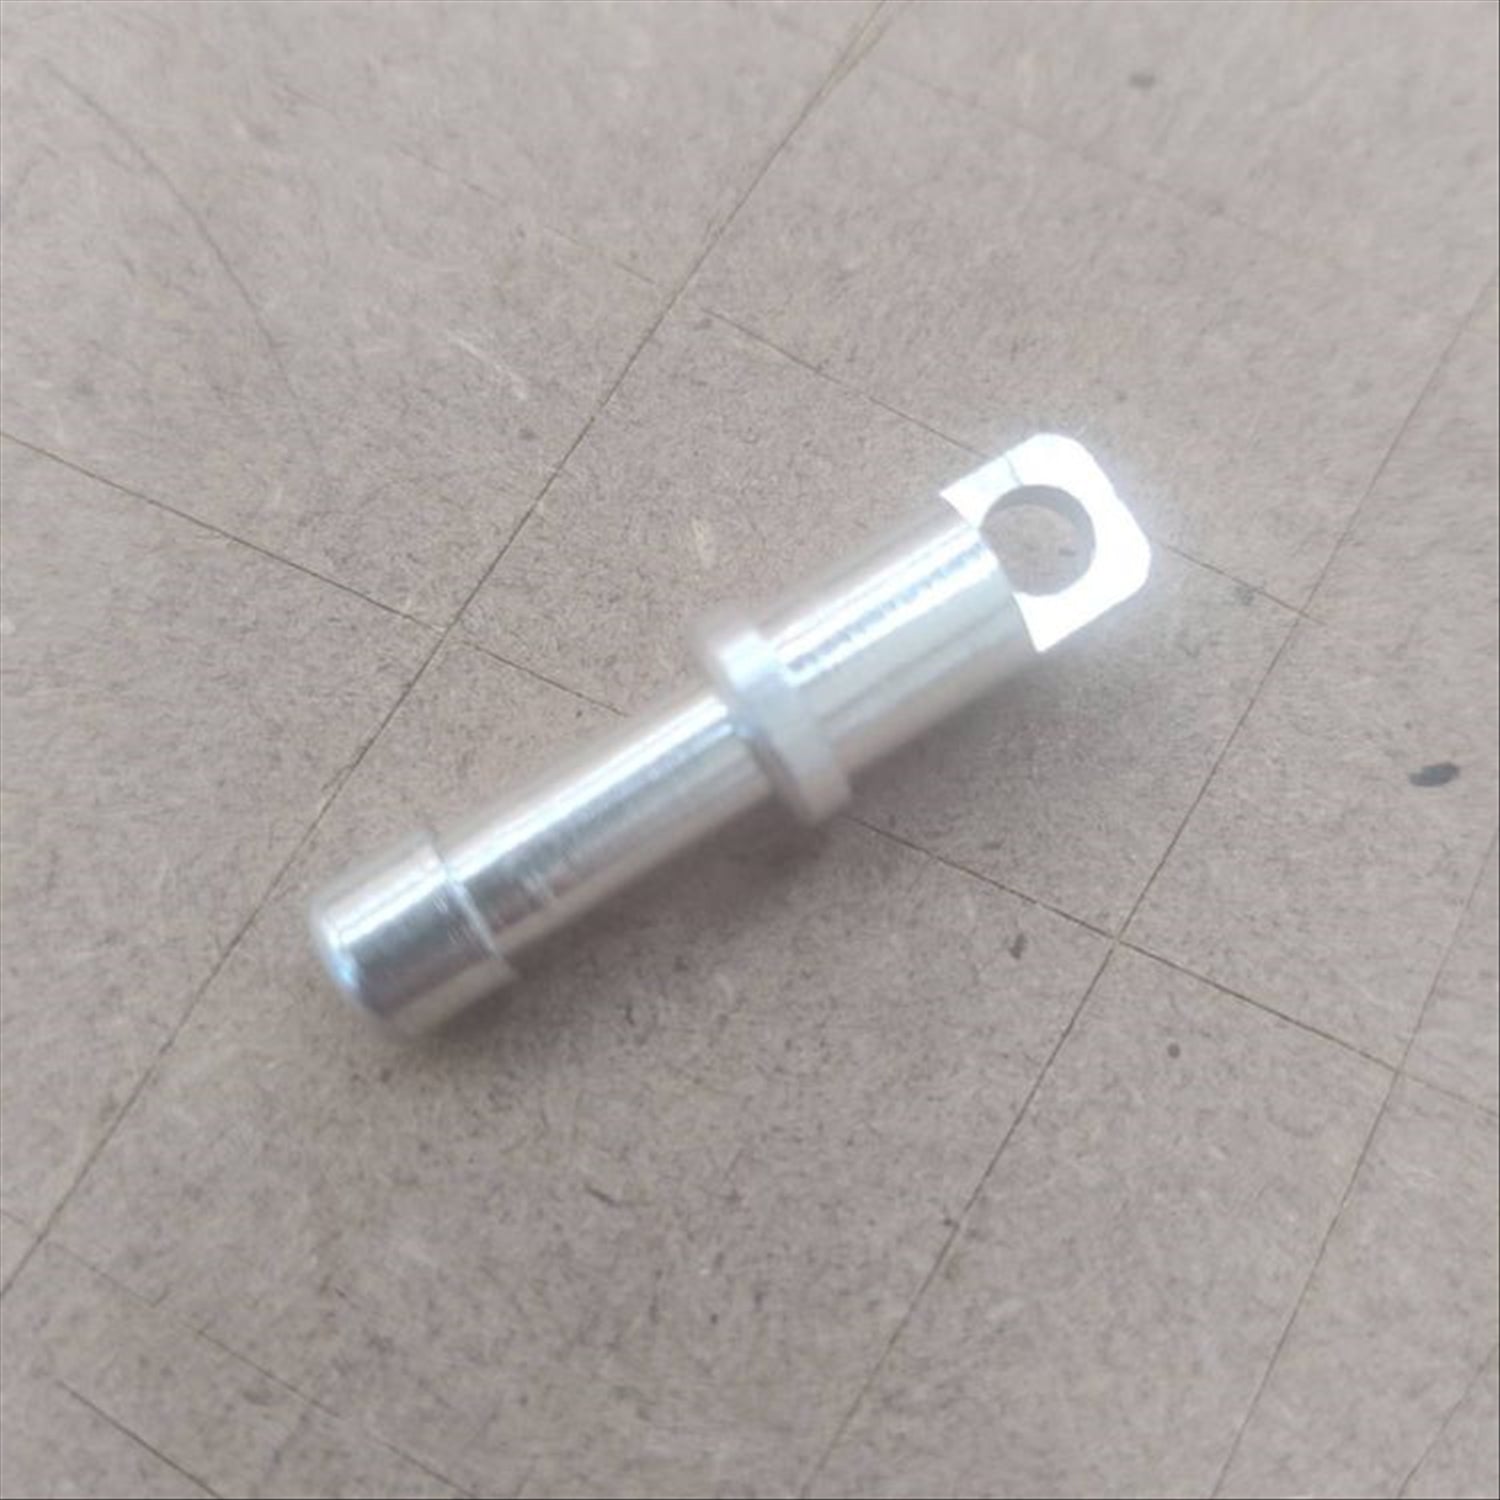 Aluminium Tent Pole End Tips - 8.5mm or 9.5mm